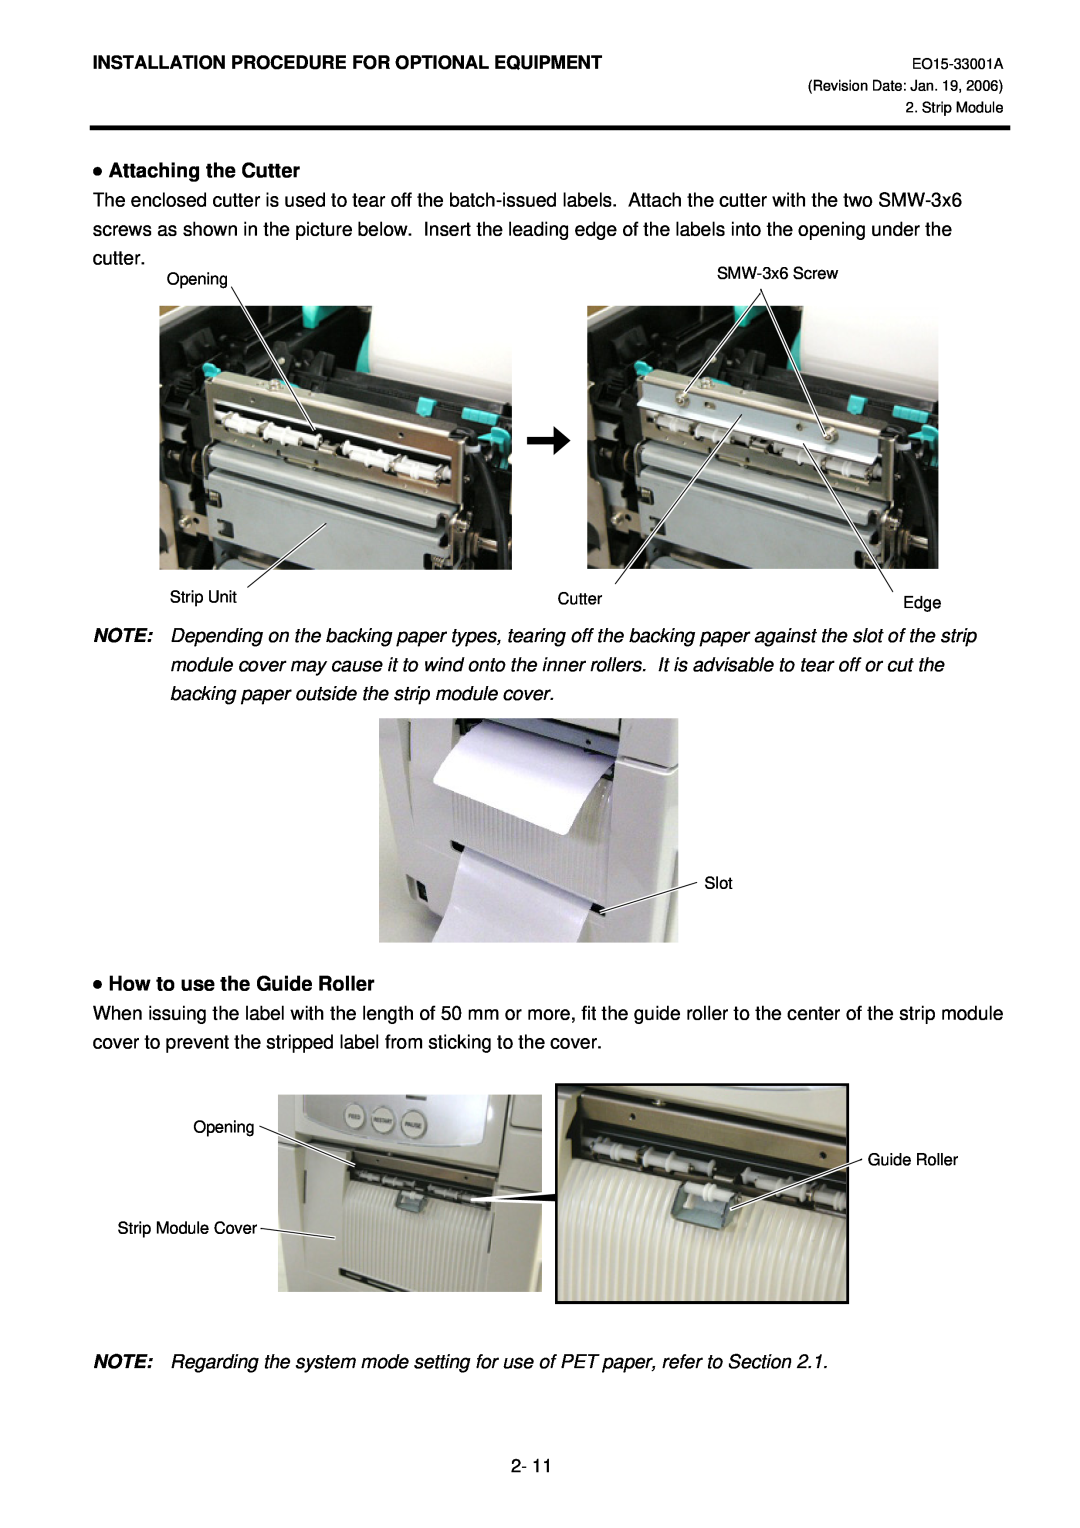 Toshiba B-SA4T installation manual Attaching the Cutter, How to use the Guide Roller 